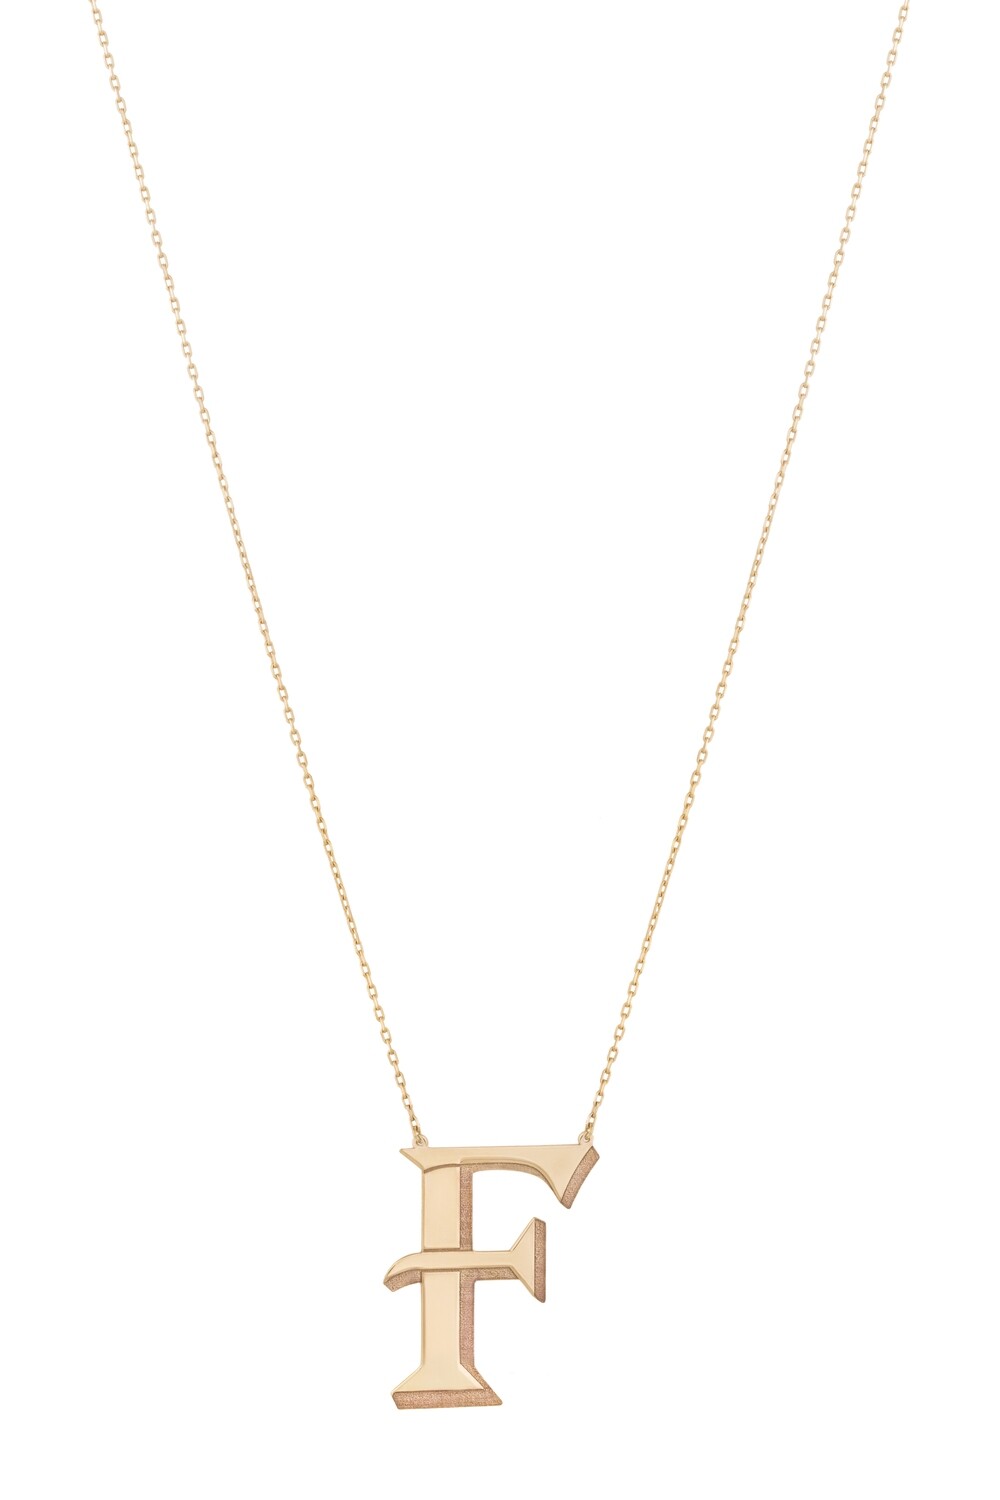 Initials Gold Necklace Letter F